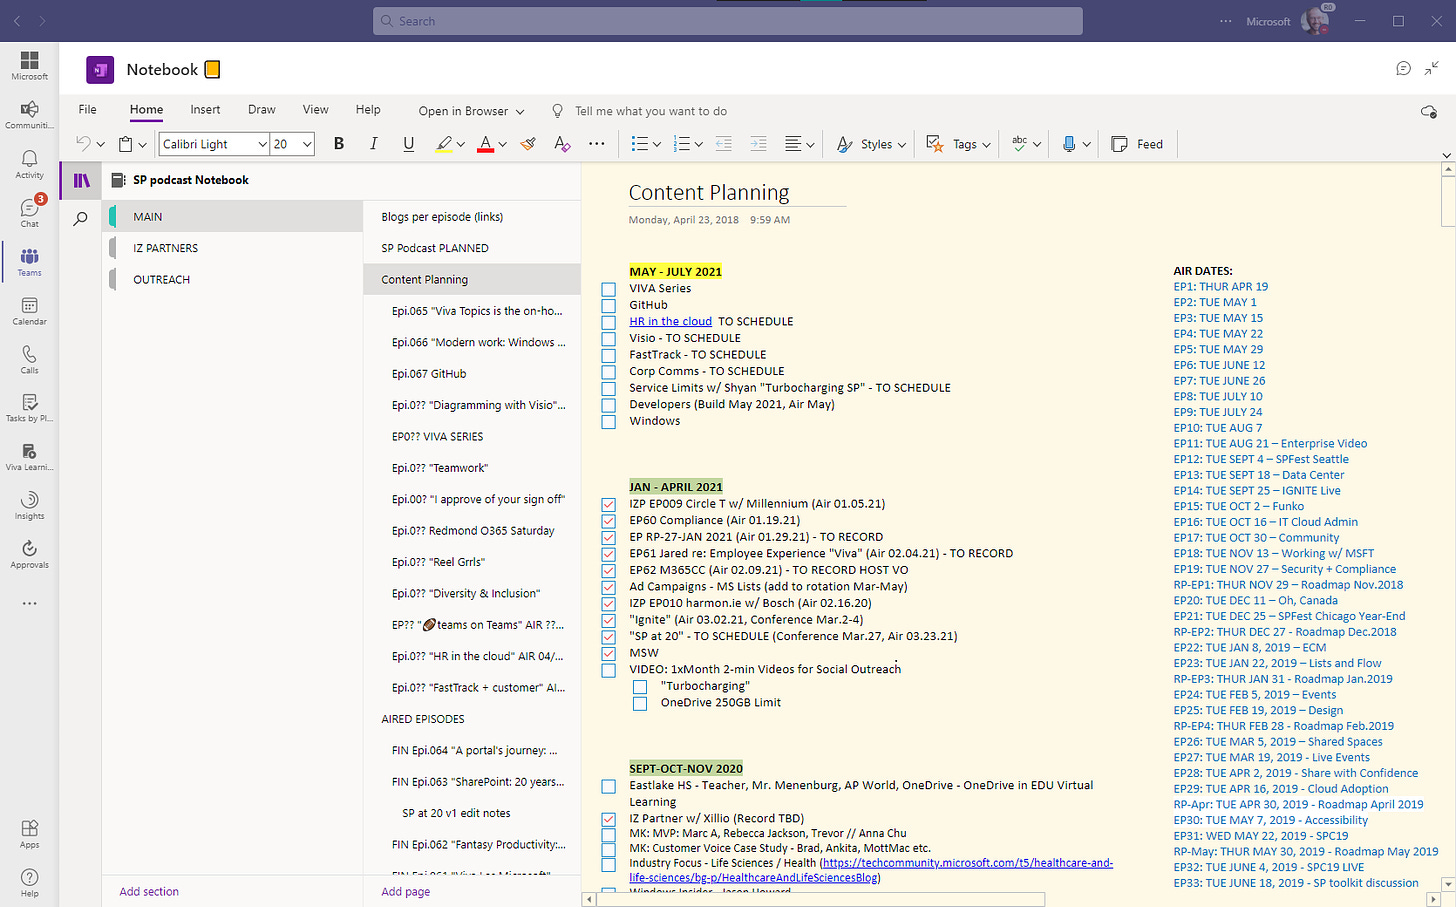 Use the connected OneNote notebook for capturing ideas and meeting notes.